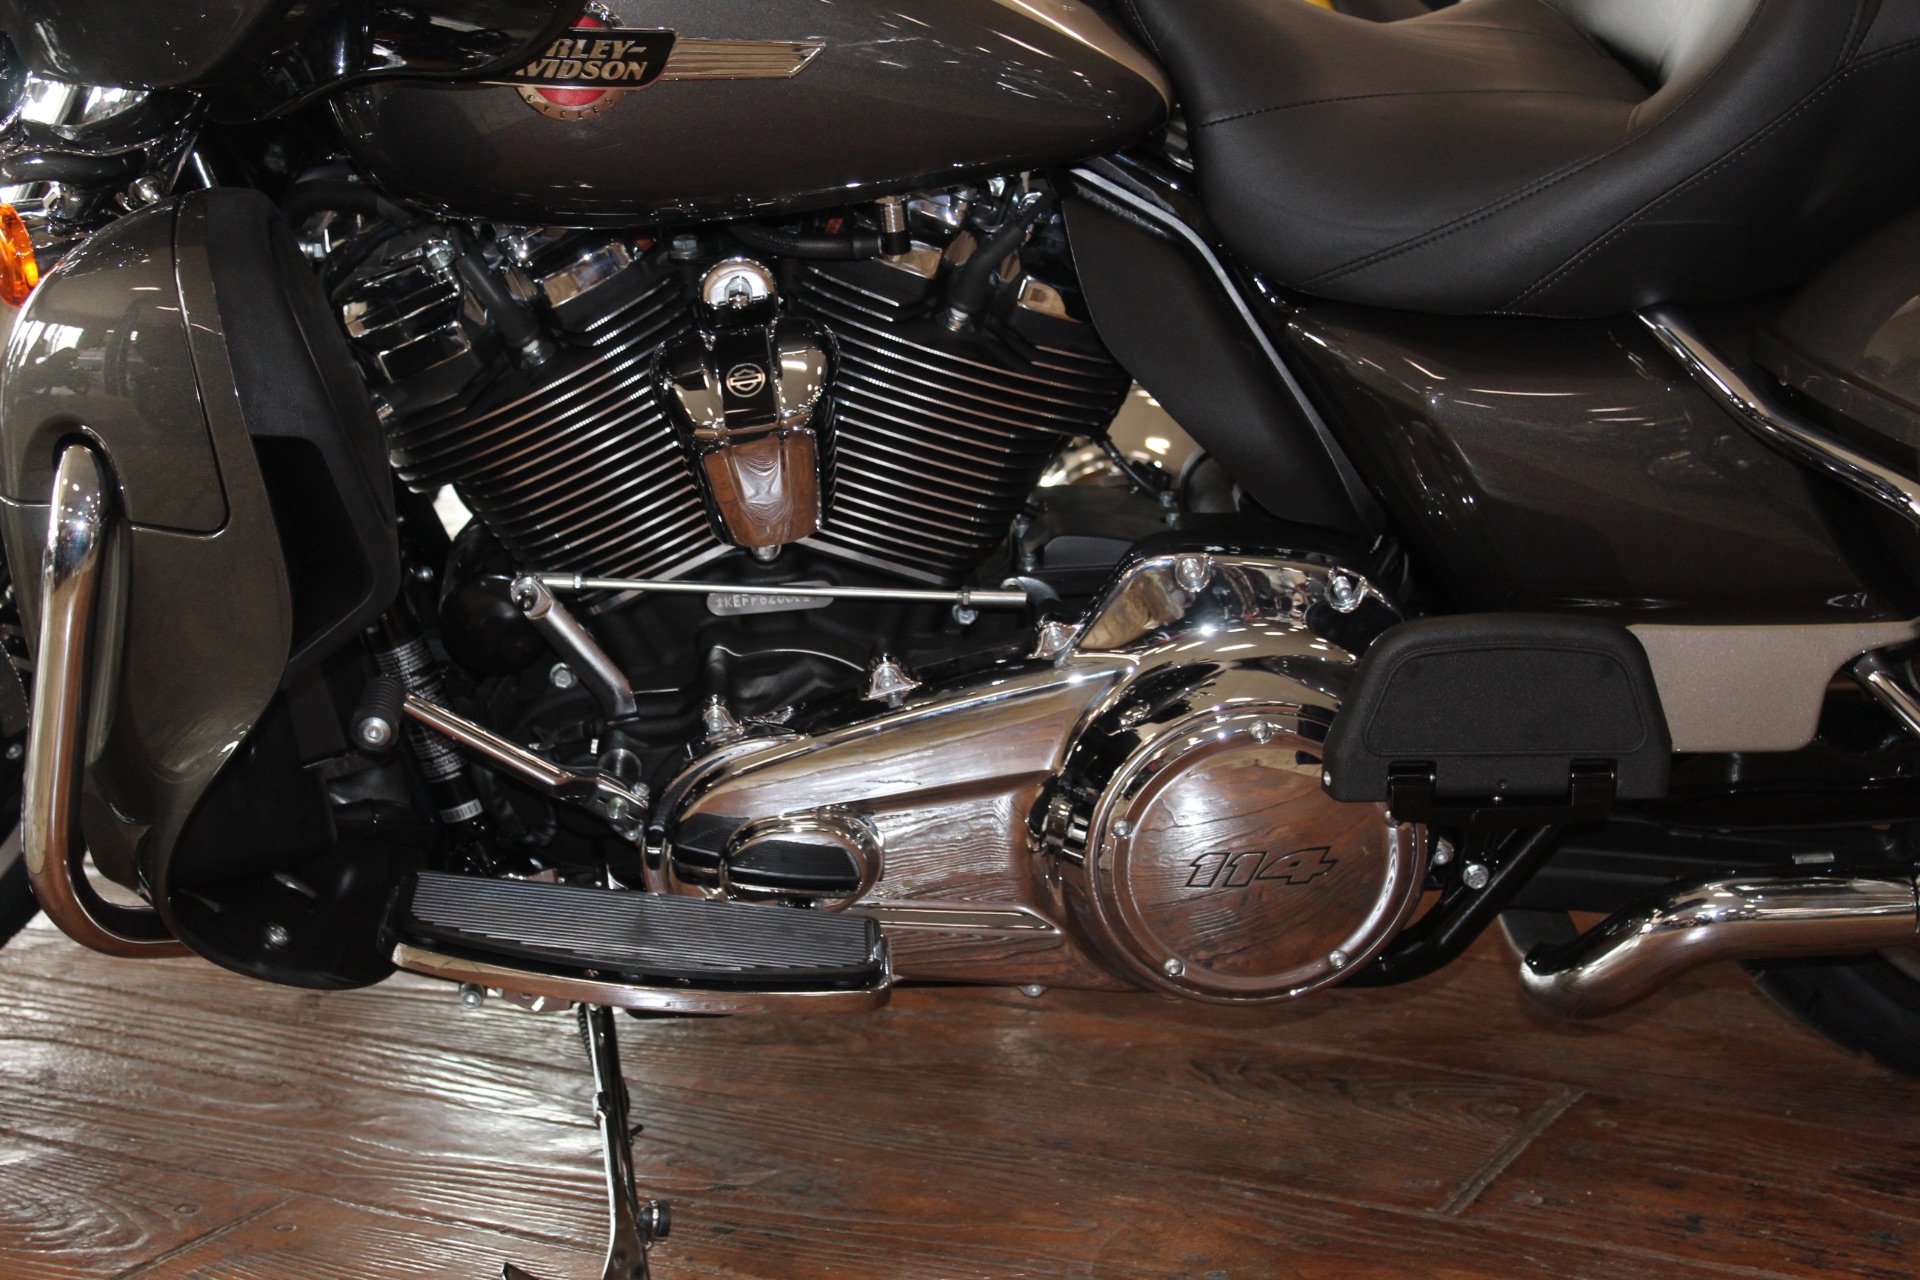 2023 Harley-Davidson Ultra Limited in Marion, Illinois - Photo 2